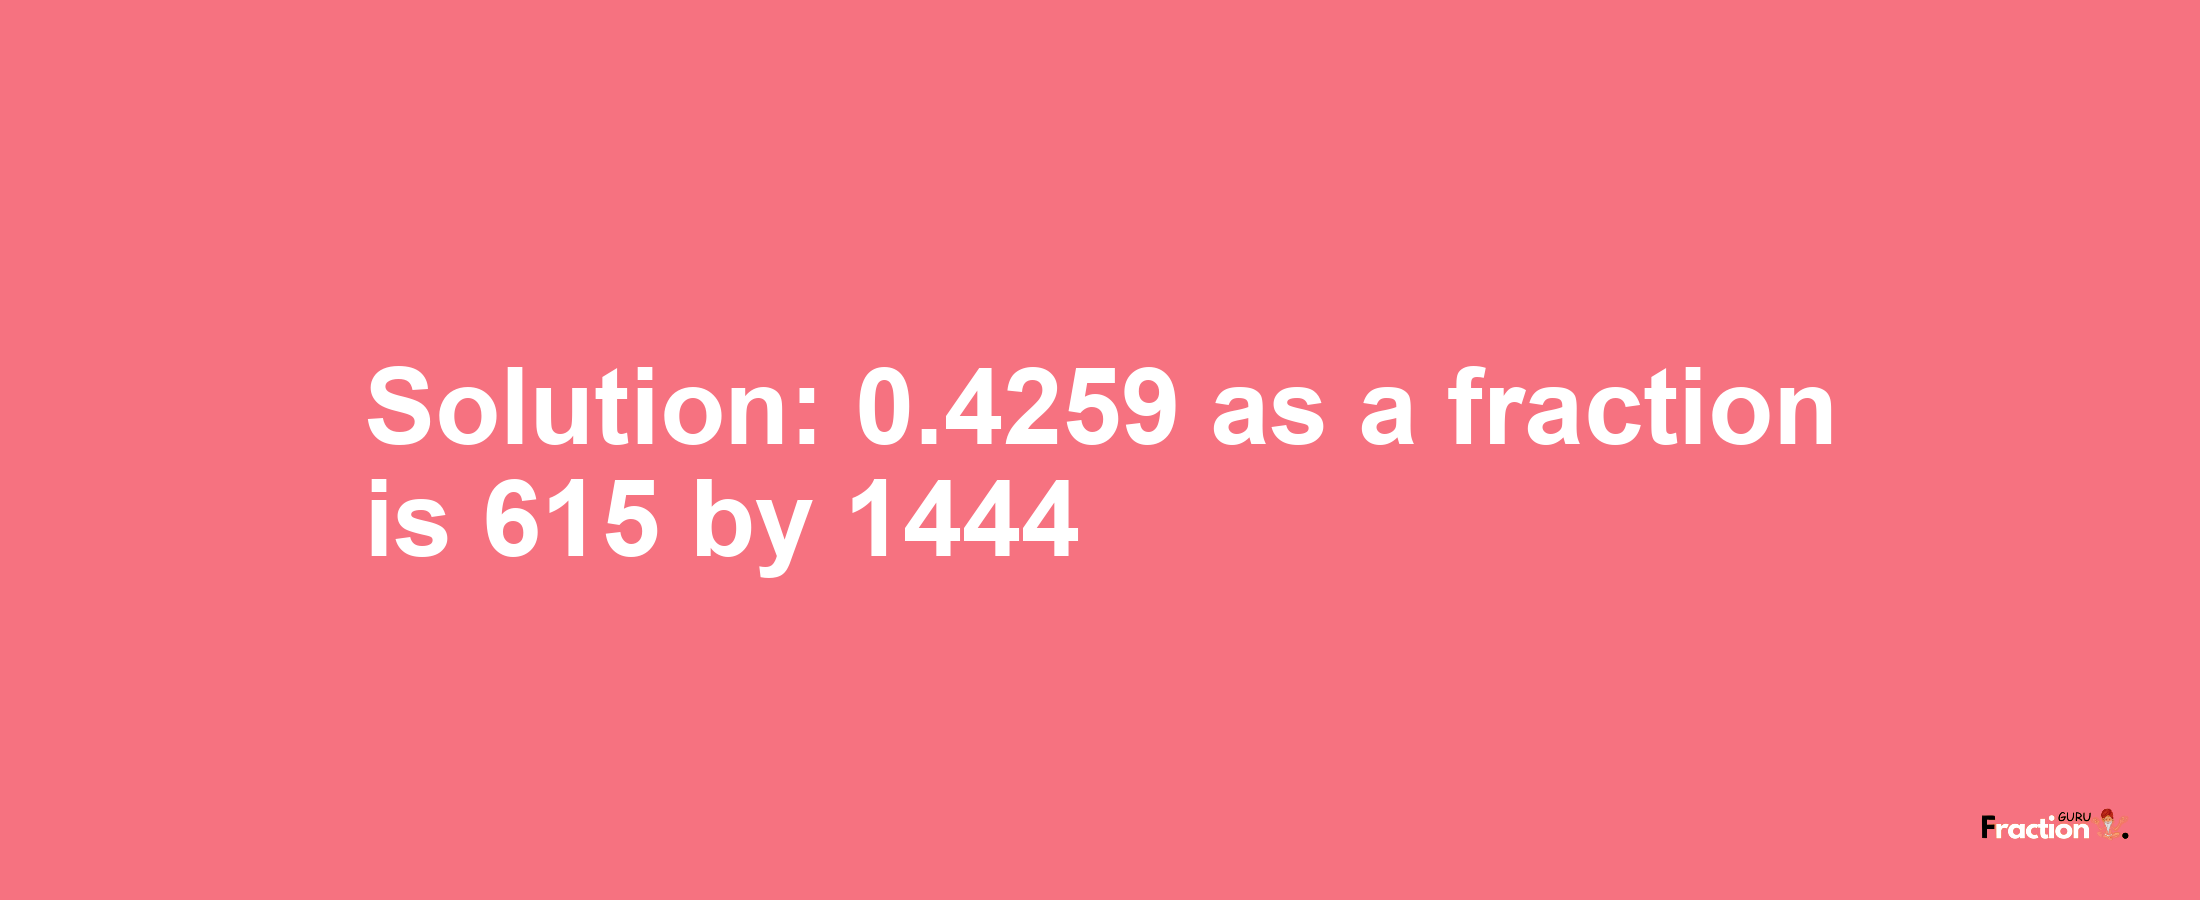 Solution:0.4259 as a fraction is 615/1444